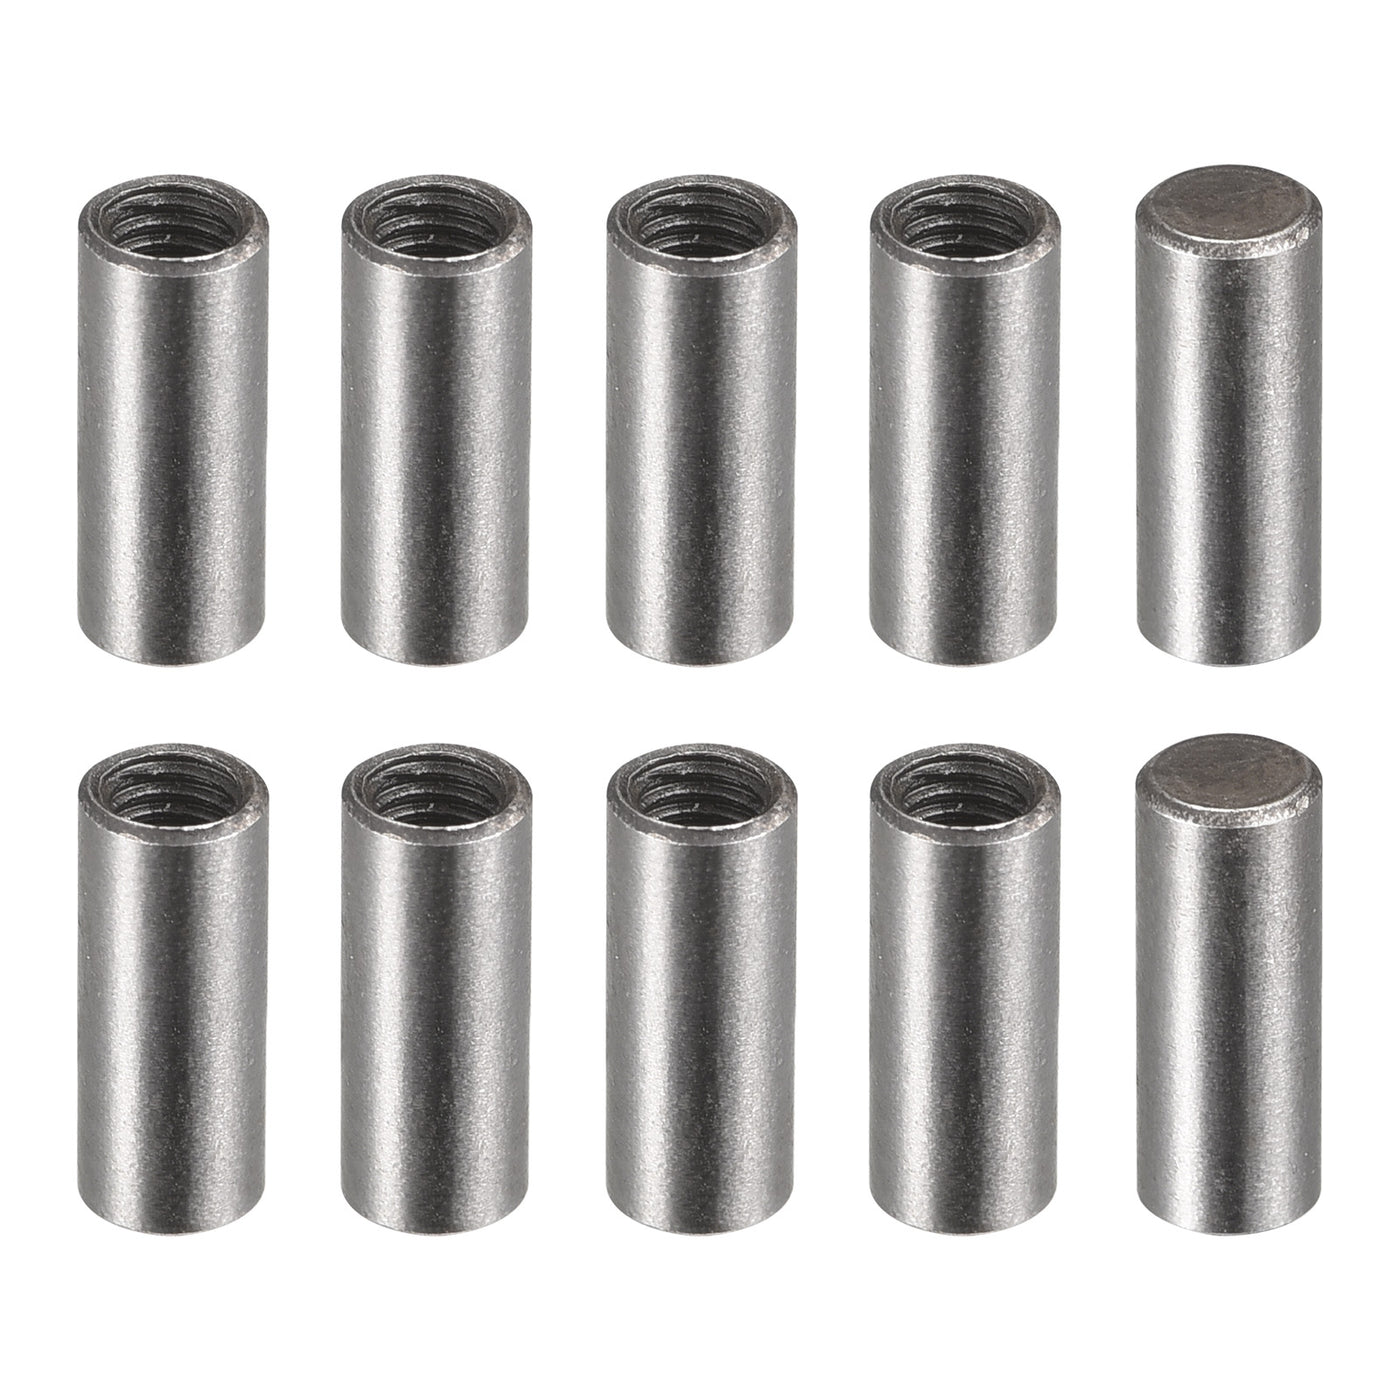 uxcell Uxcell Carbon Steel Dowel Pin 4 x 10mm M3 Female Thread Cylindrical Shelf Support Pin 10Pcs